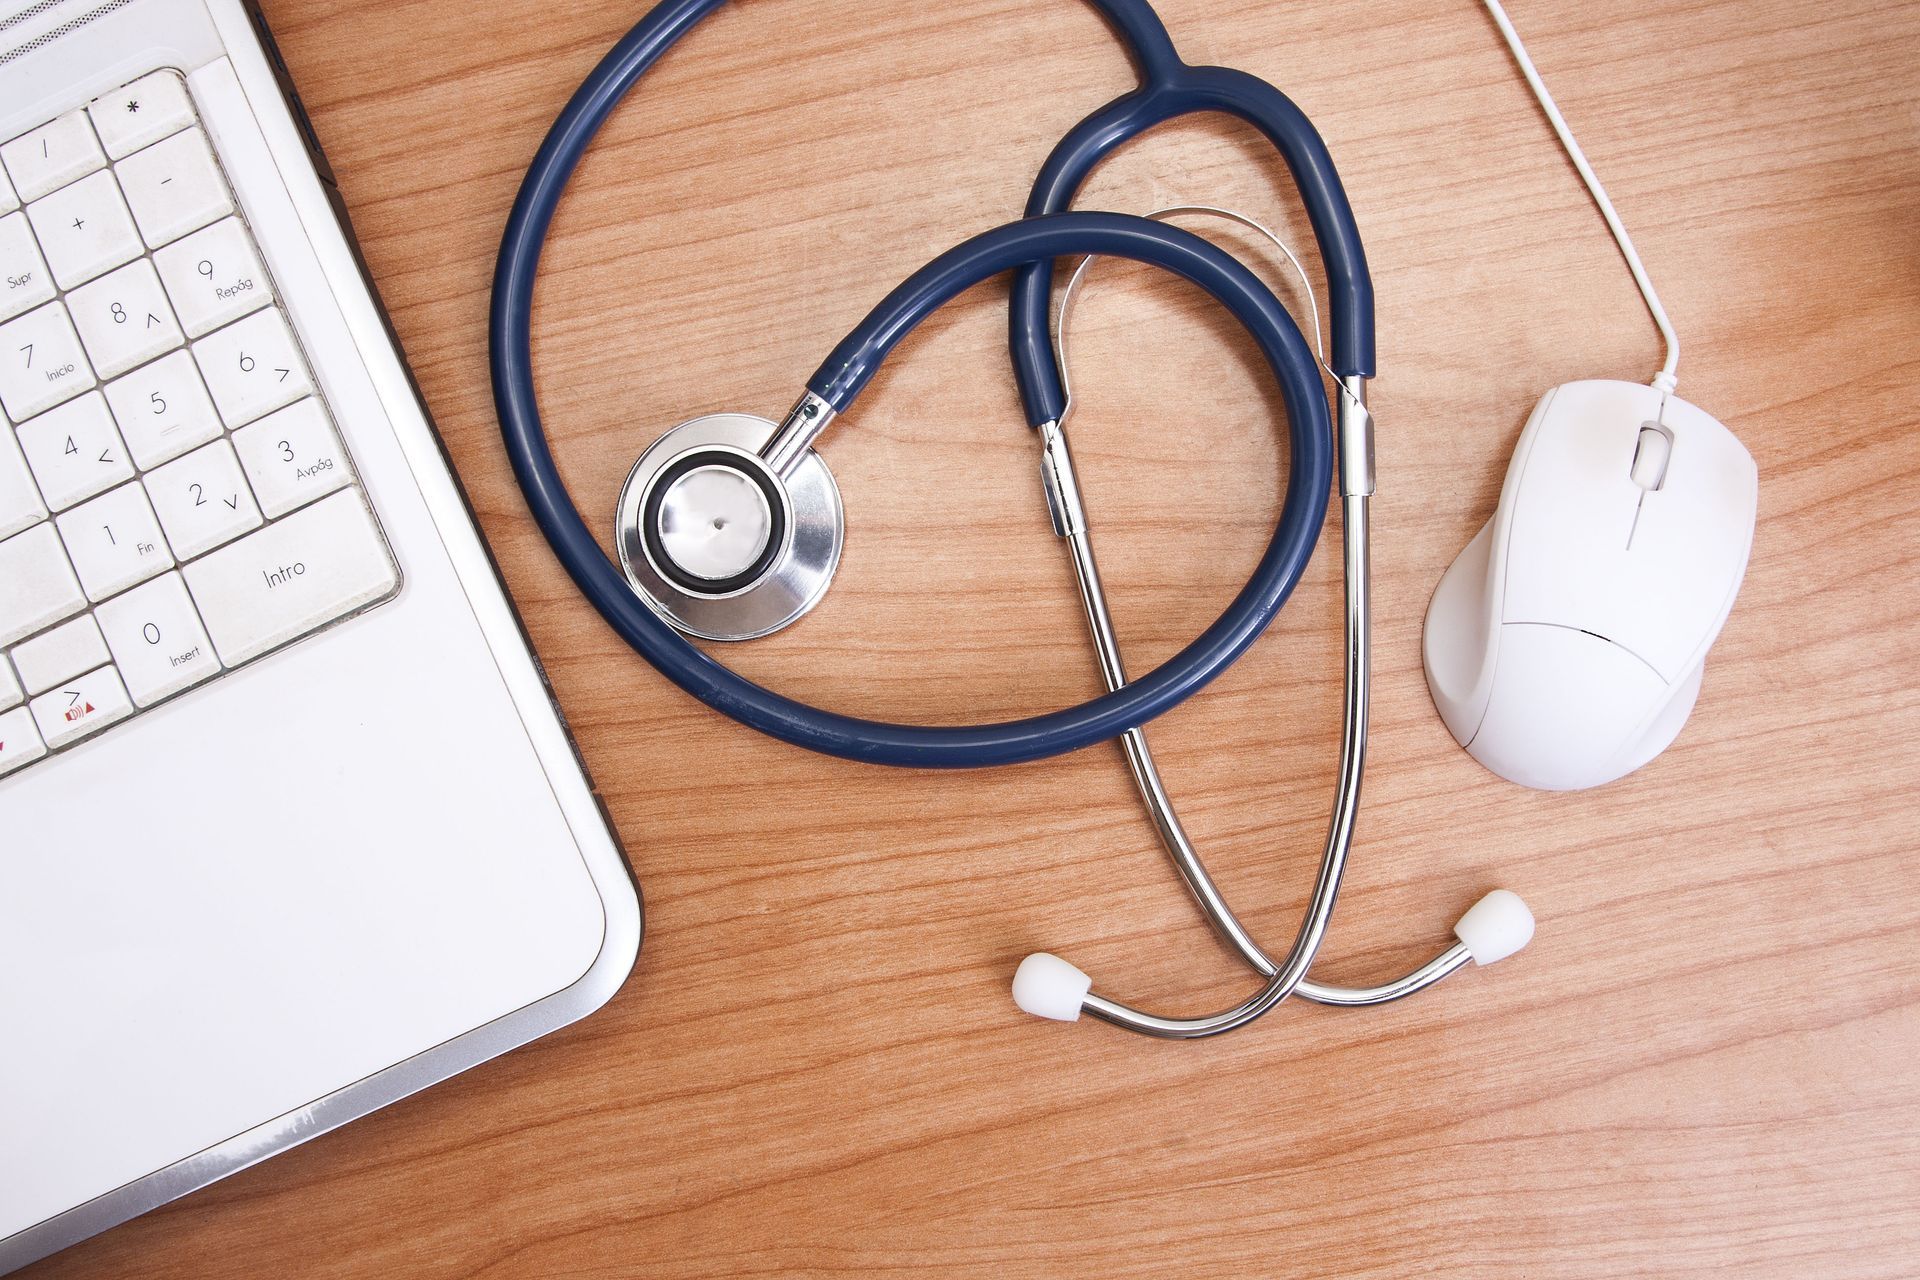 A stethoscope is sitting next to a laptop and mouse on a wooden table.